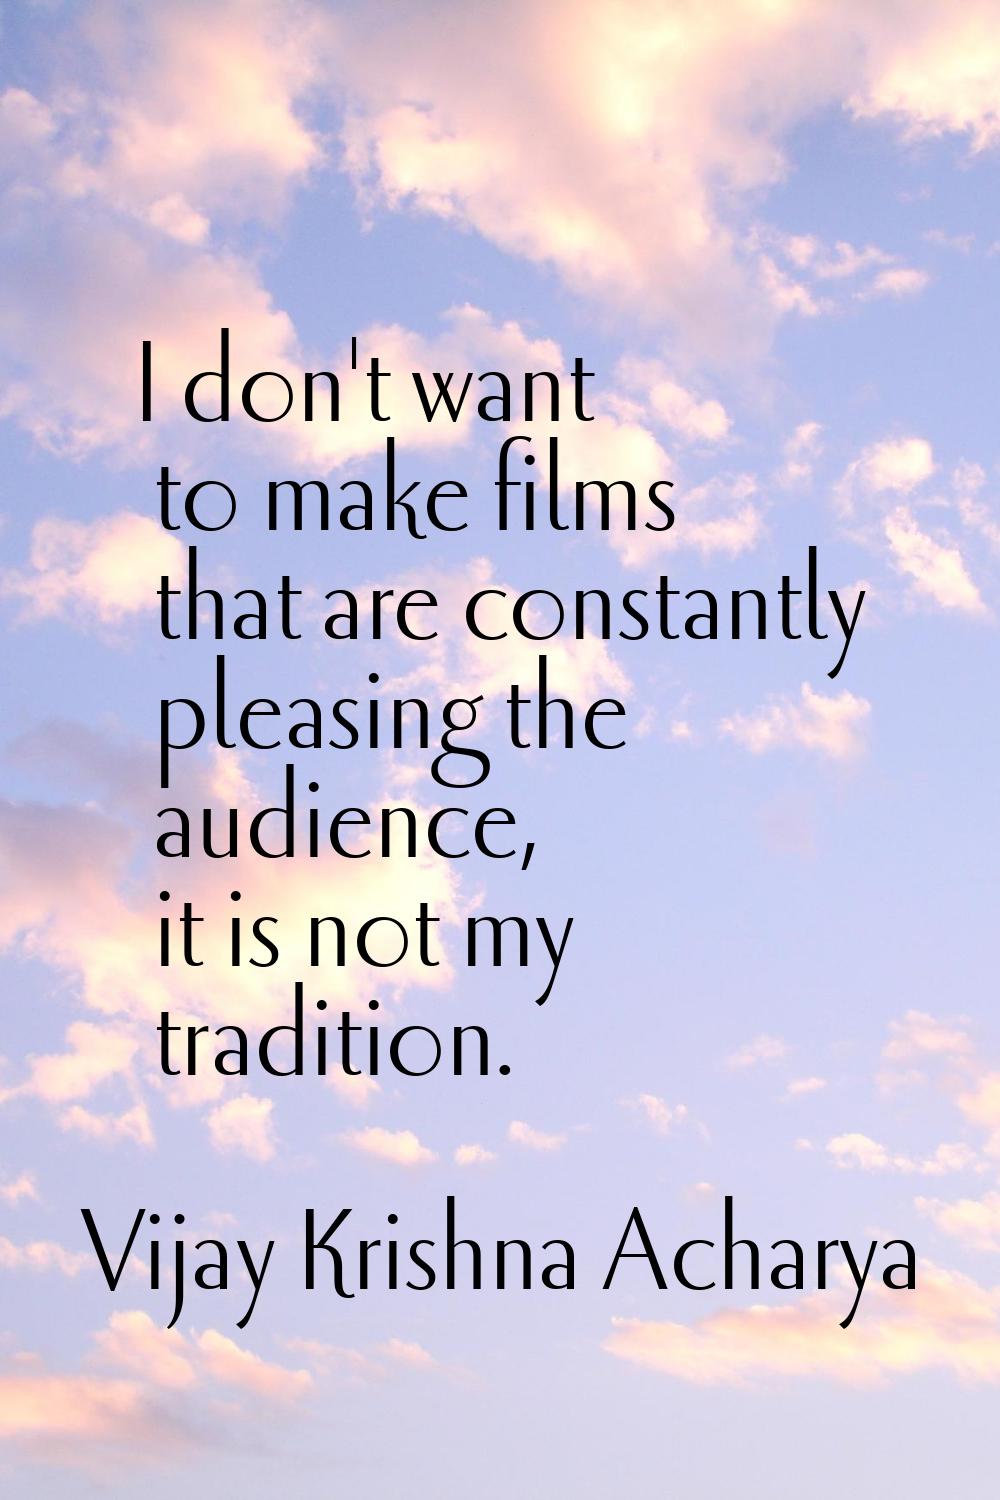 I don't want to make films that are constantly pleasing the audience, it is not my tradition.